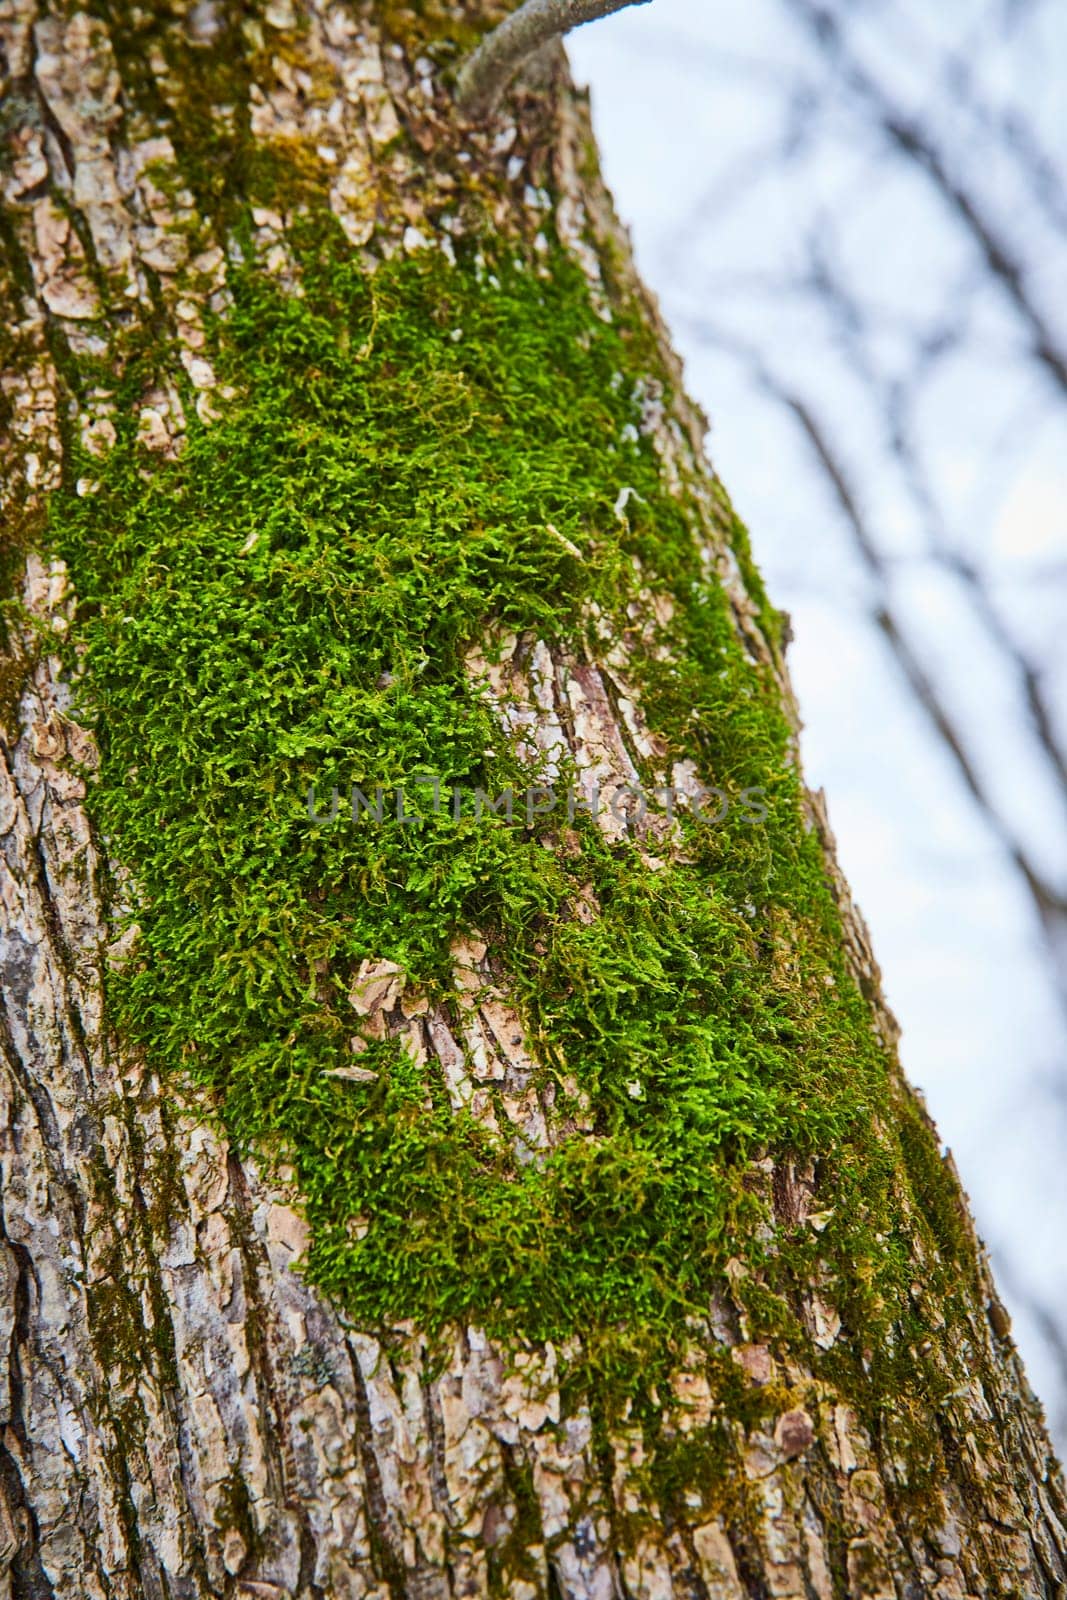 Vibrant Green Moss on Aged Tree Bark in Cooks Landing County Park, Fort Wayne, Indiana - A Winter Day Snapshot of Nature's Artistry